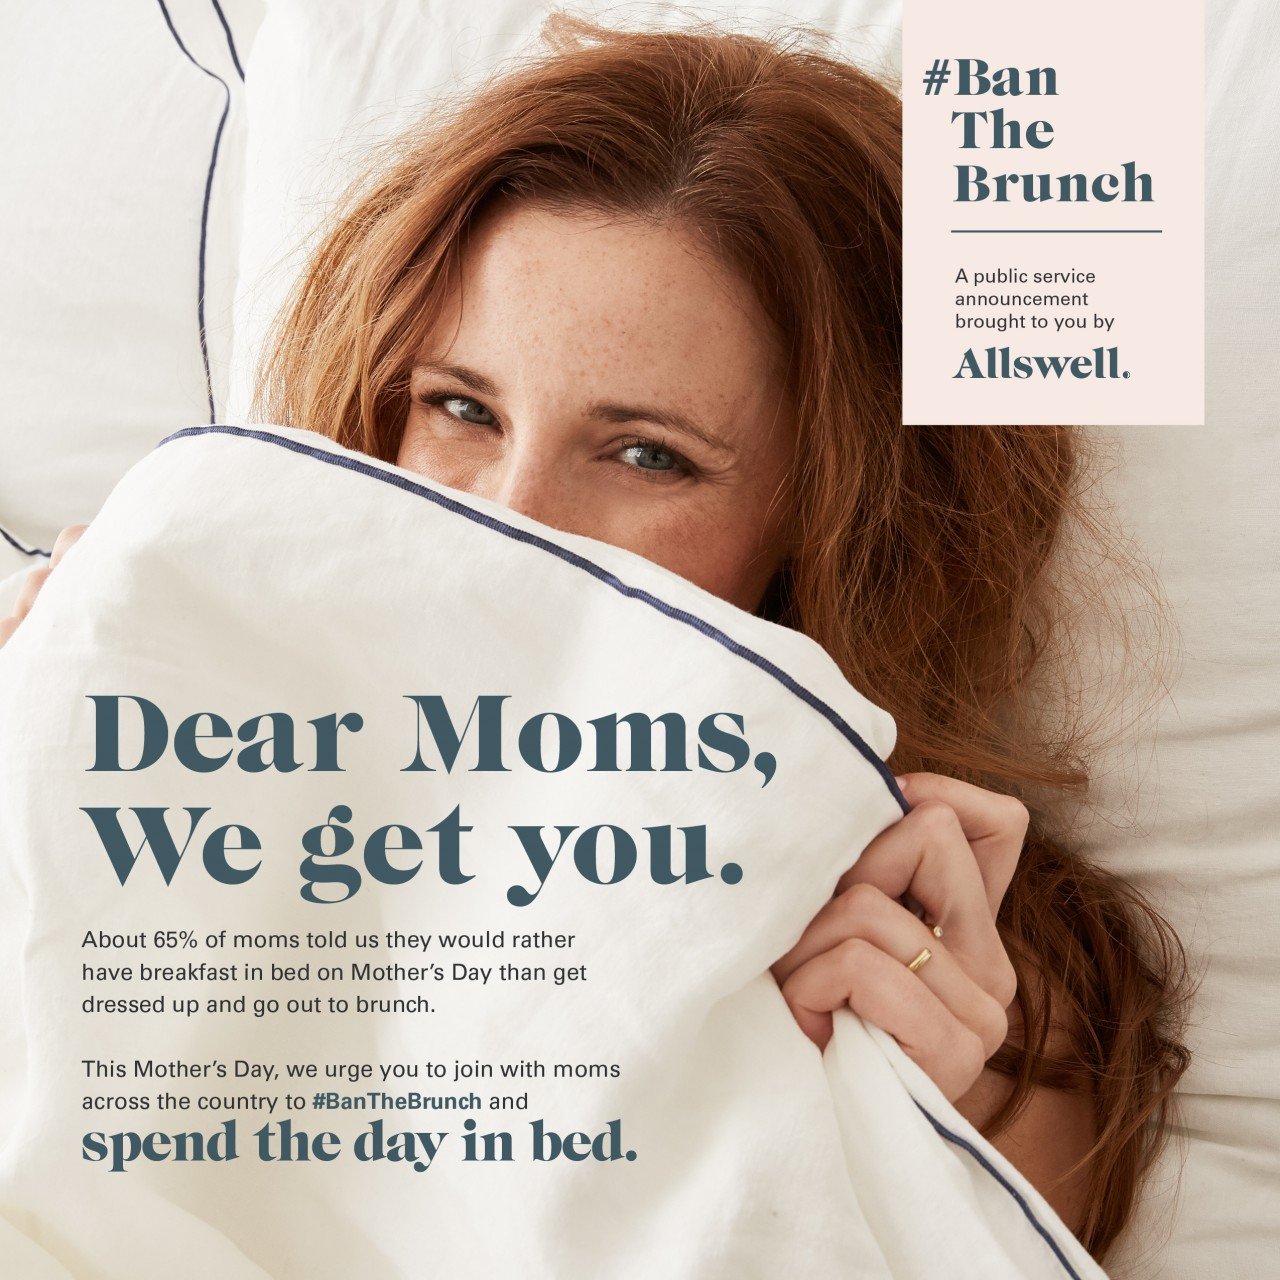 10 Great Mother’s Day Campaigns to Draw Inspiration From